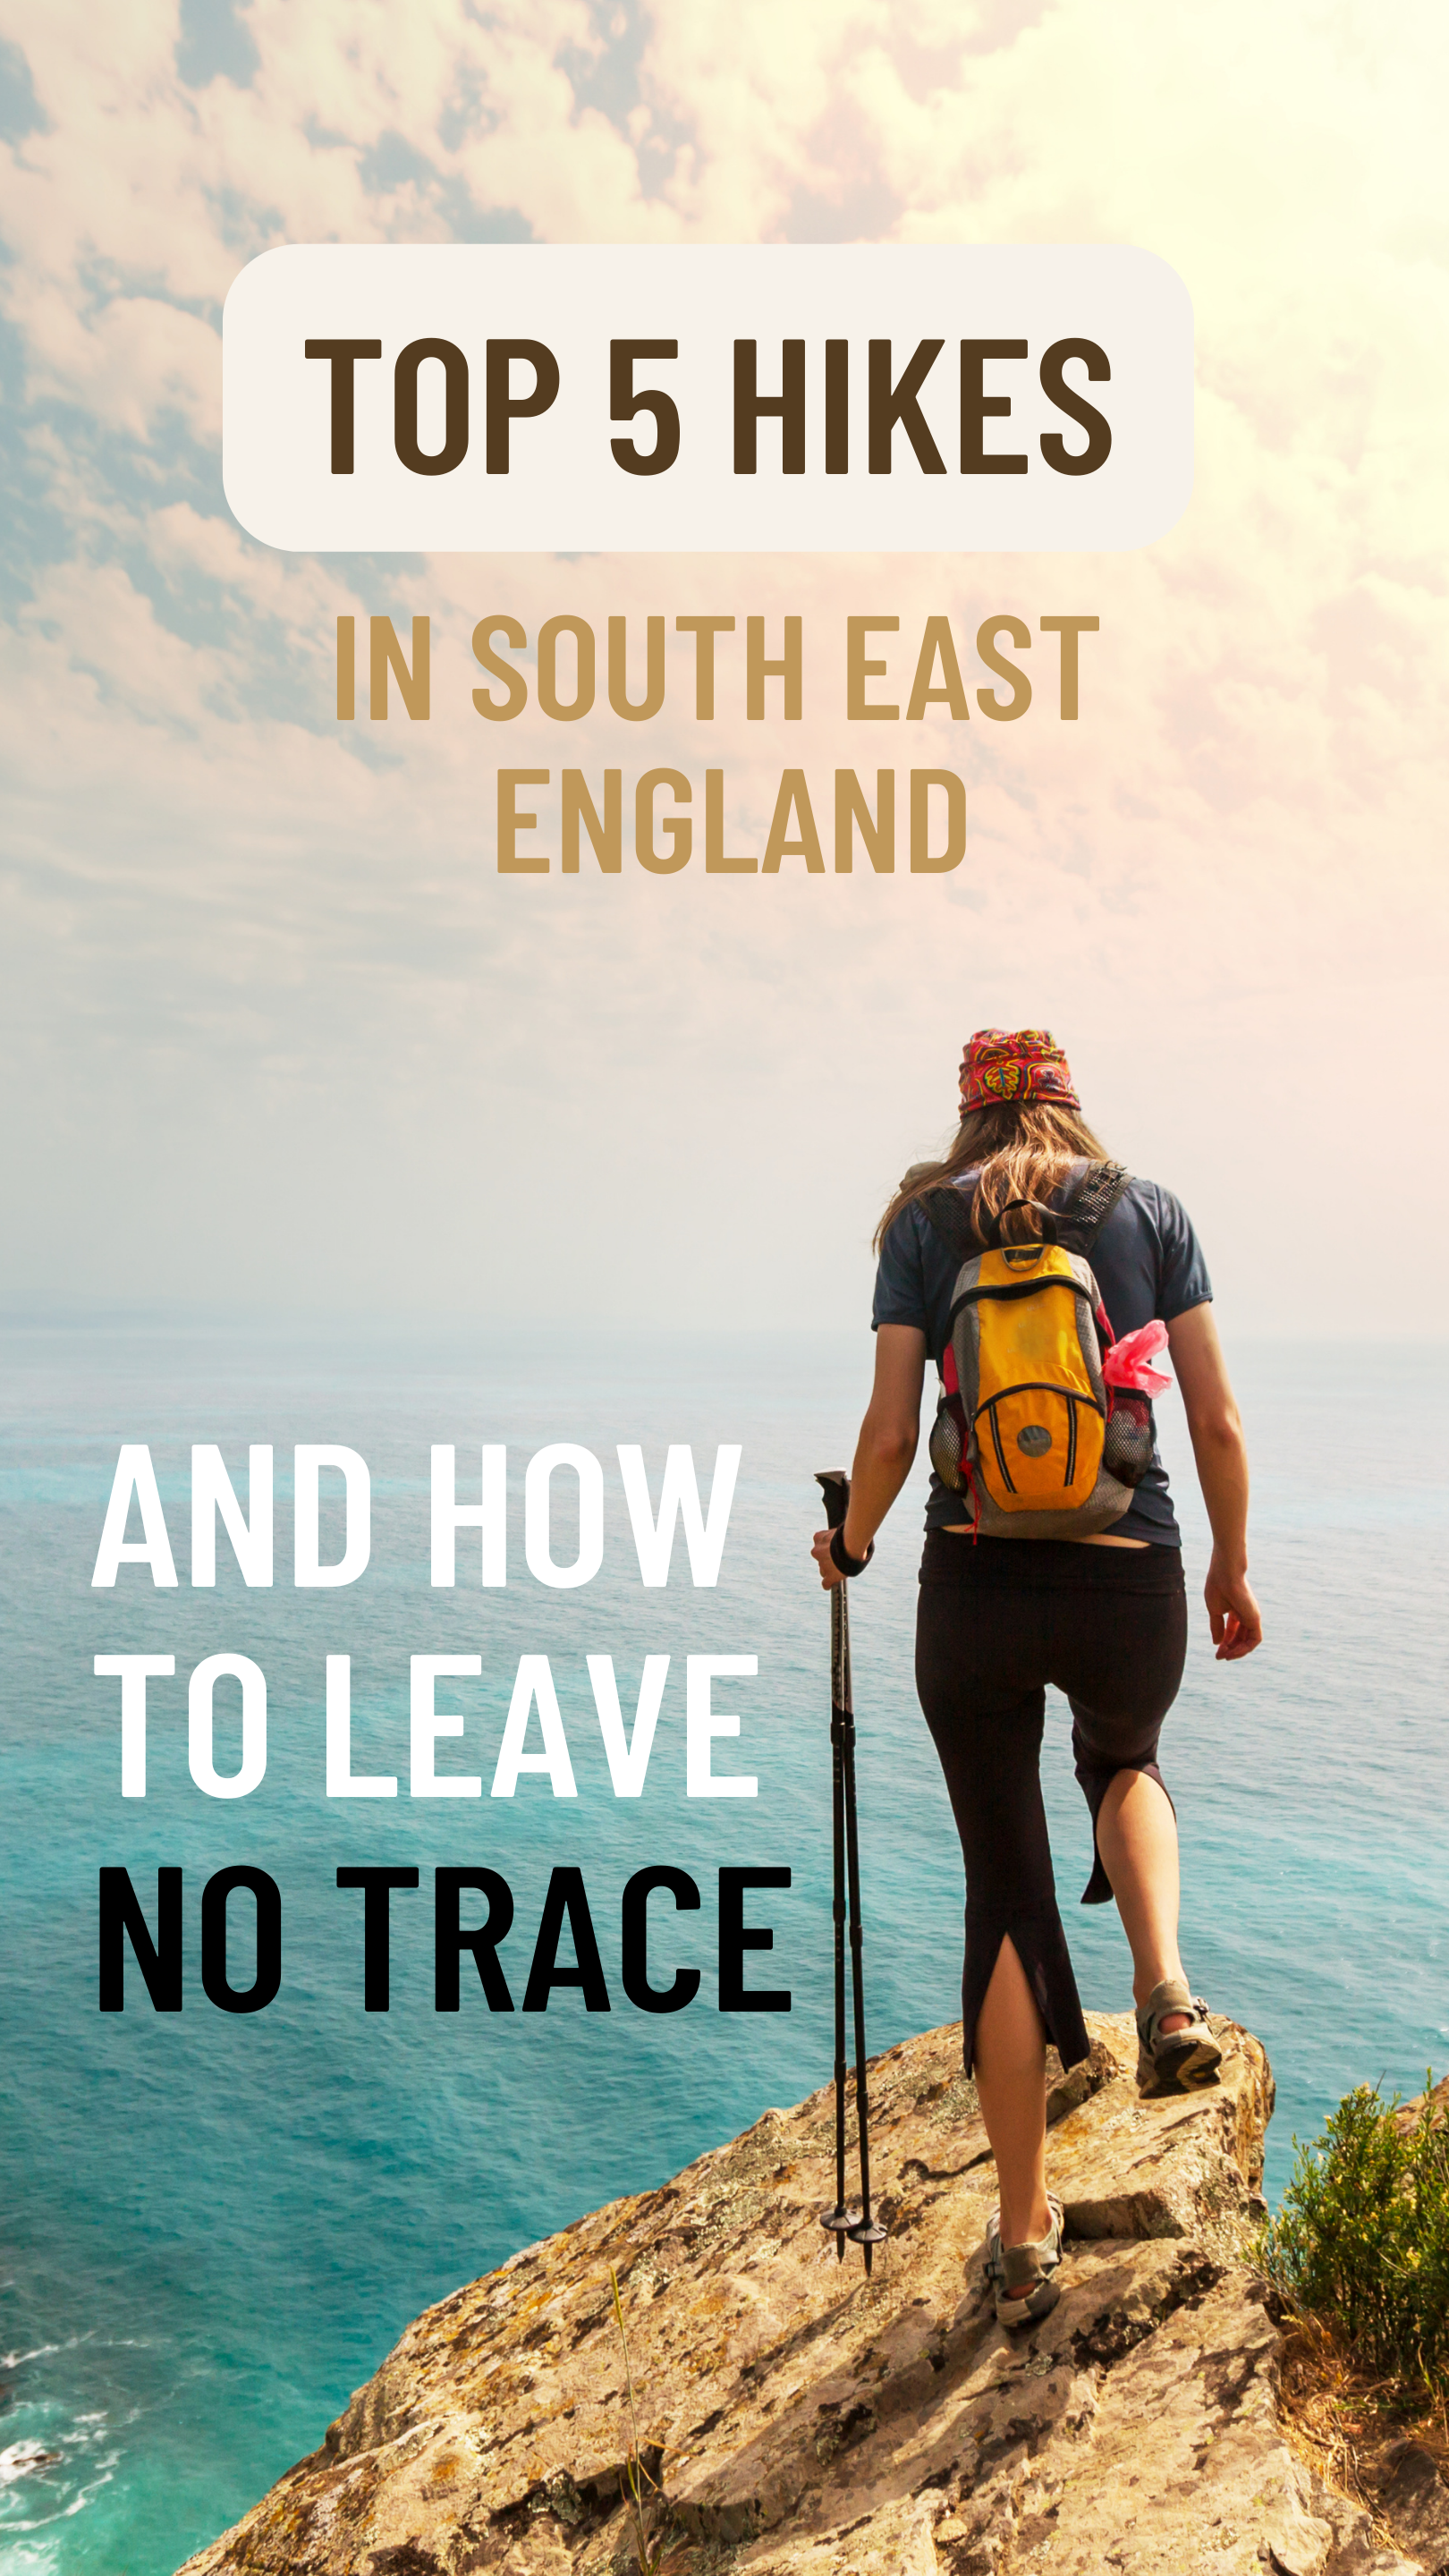 Top 5 Hiking Trails in the South East and how to leave no trace.